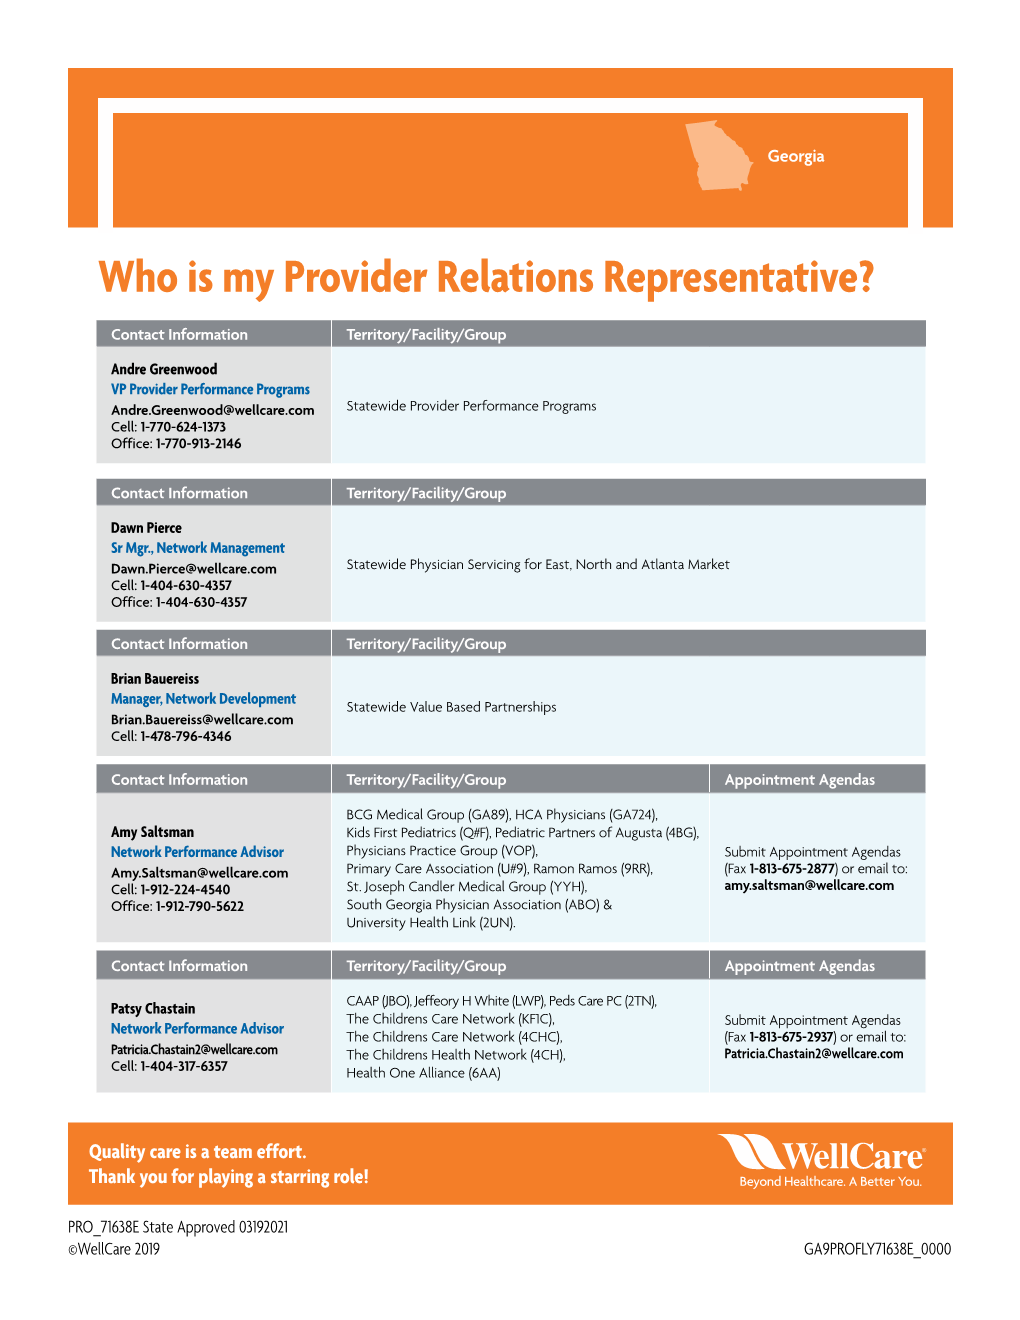 Who Is My Provider Relations Representative?